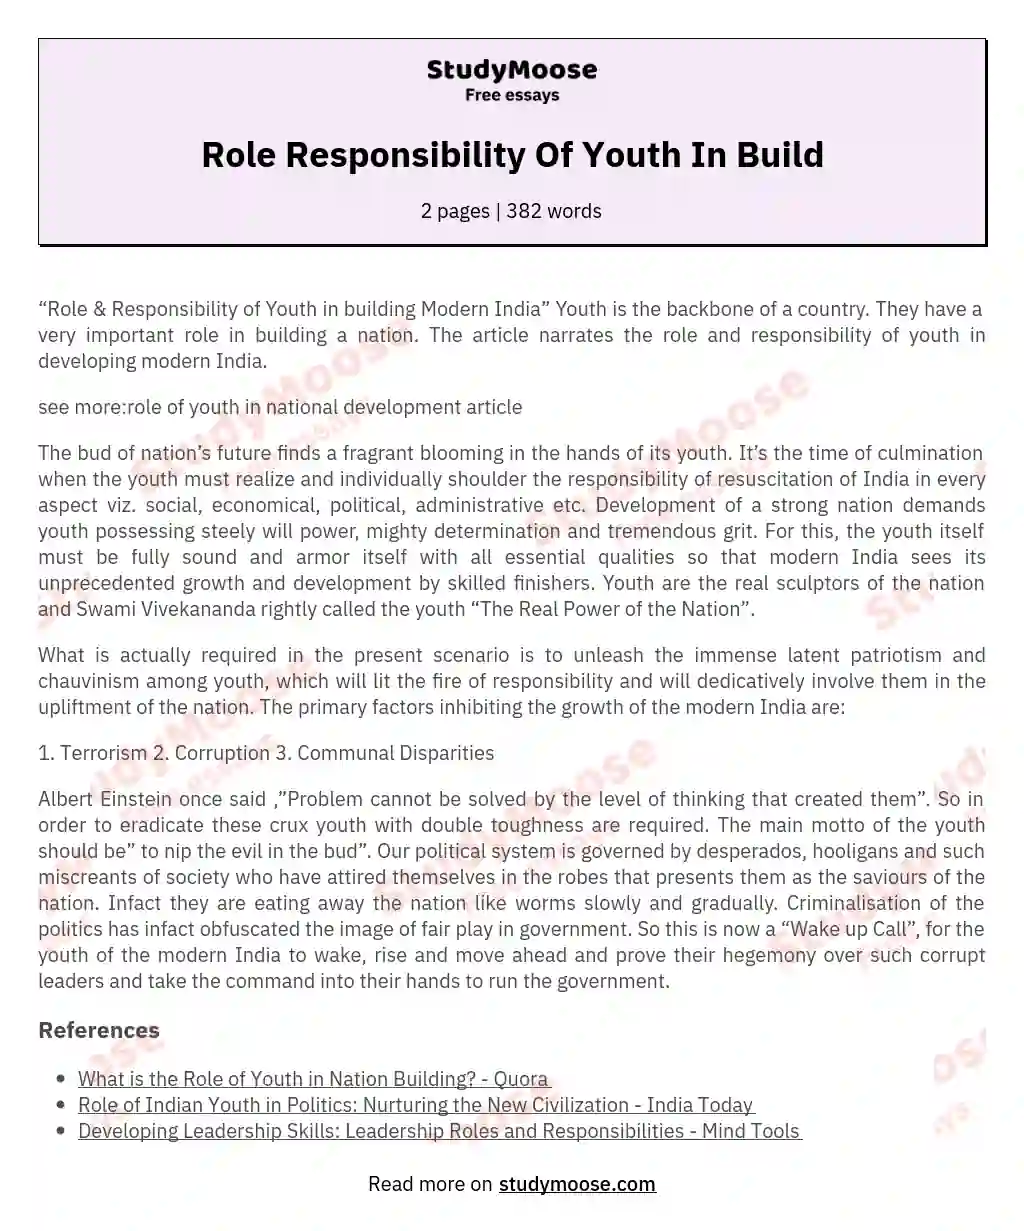 Role Responsibility Of Youth In Build essay